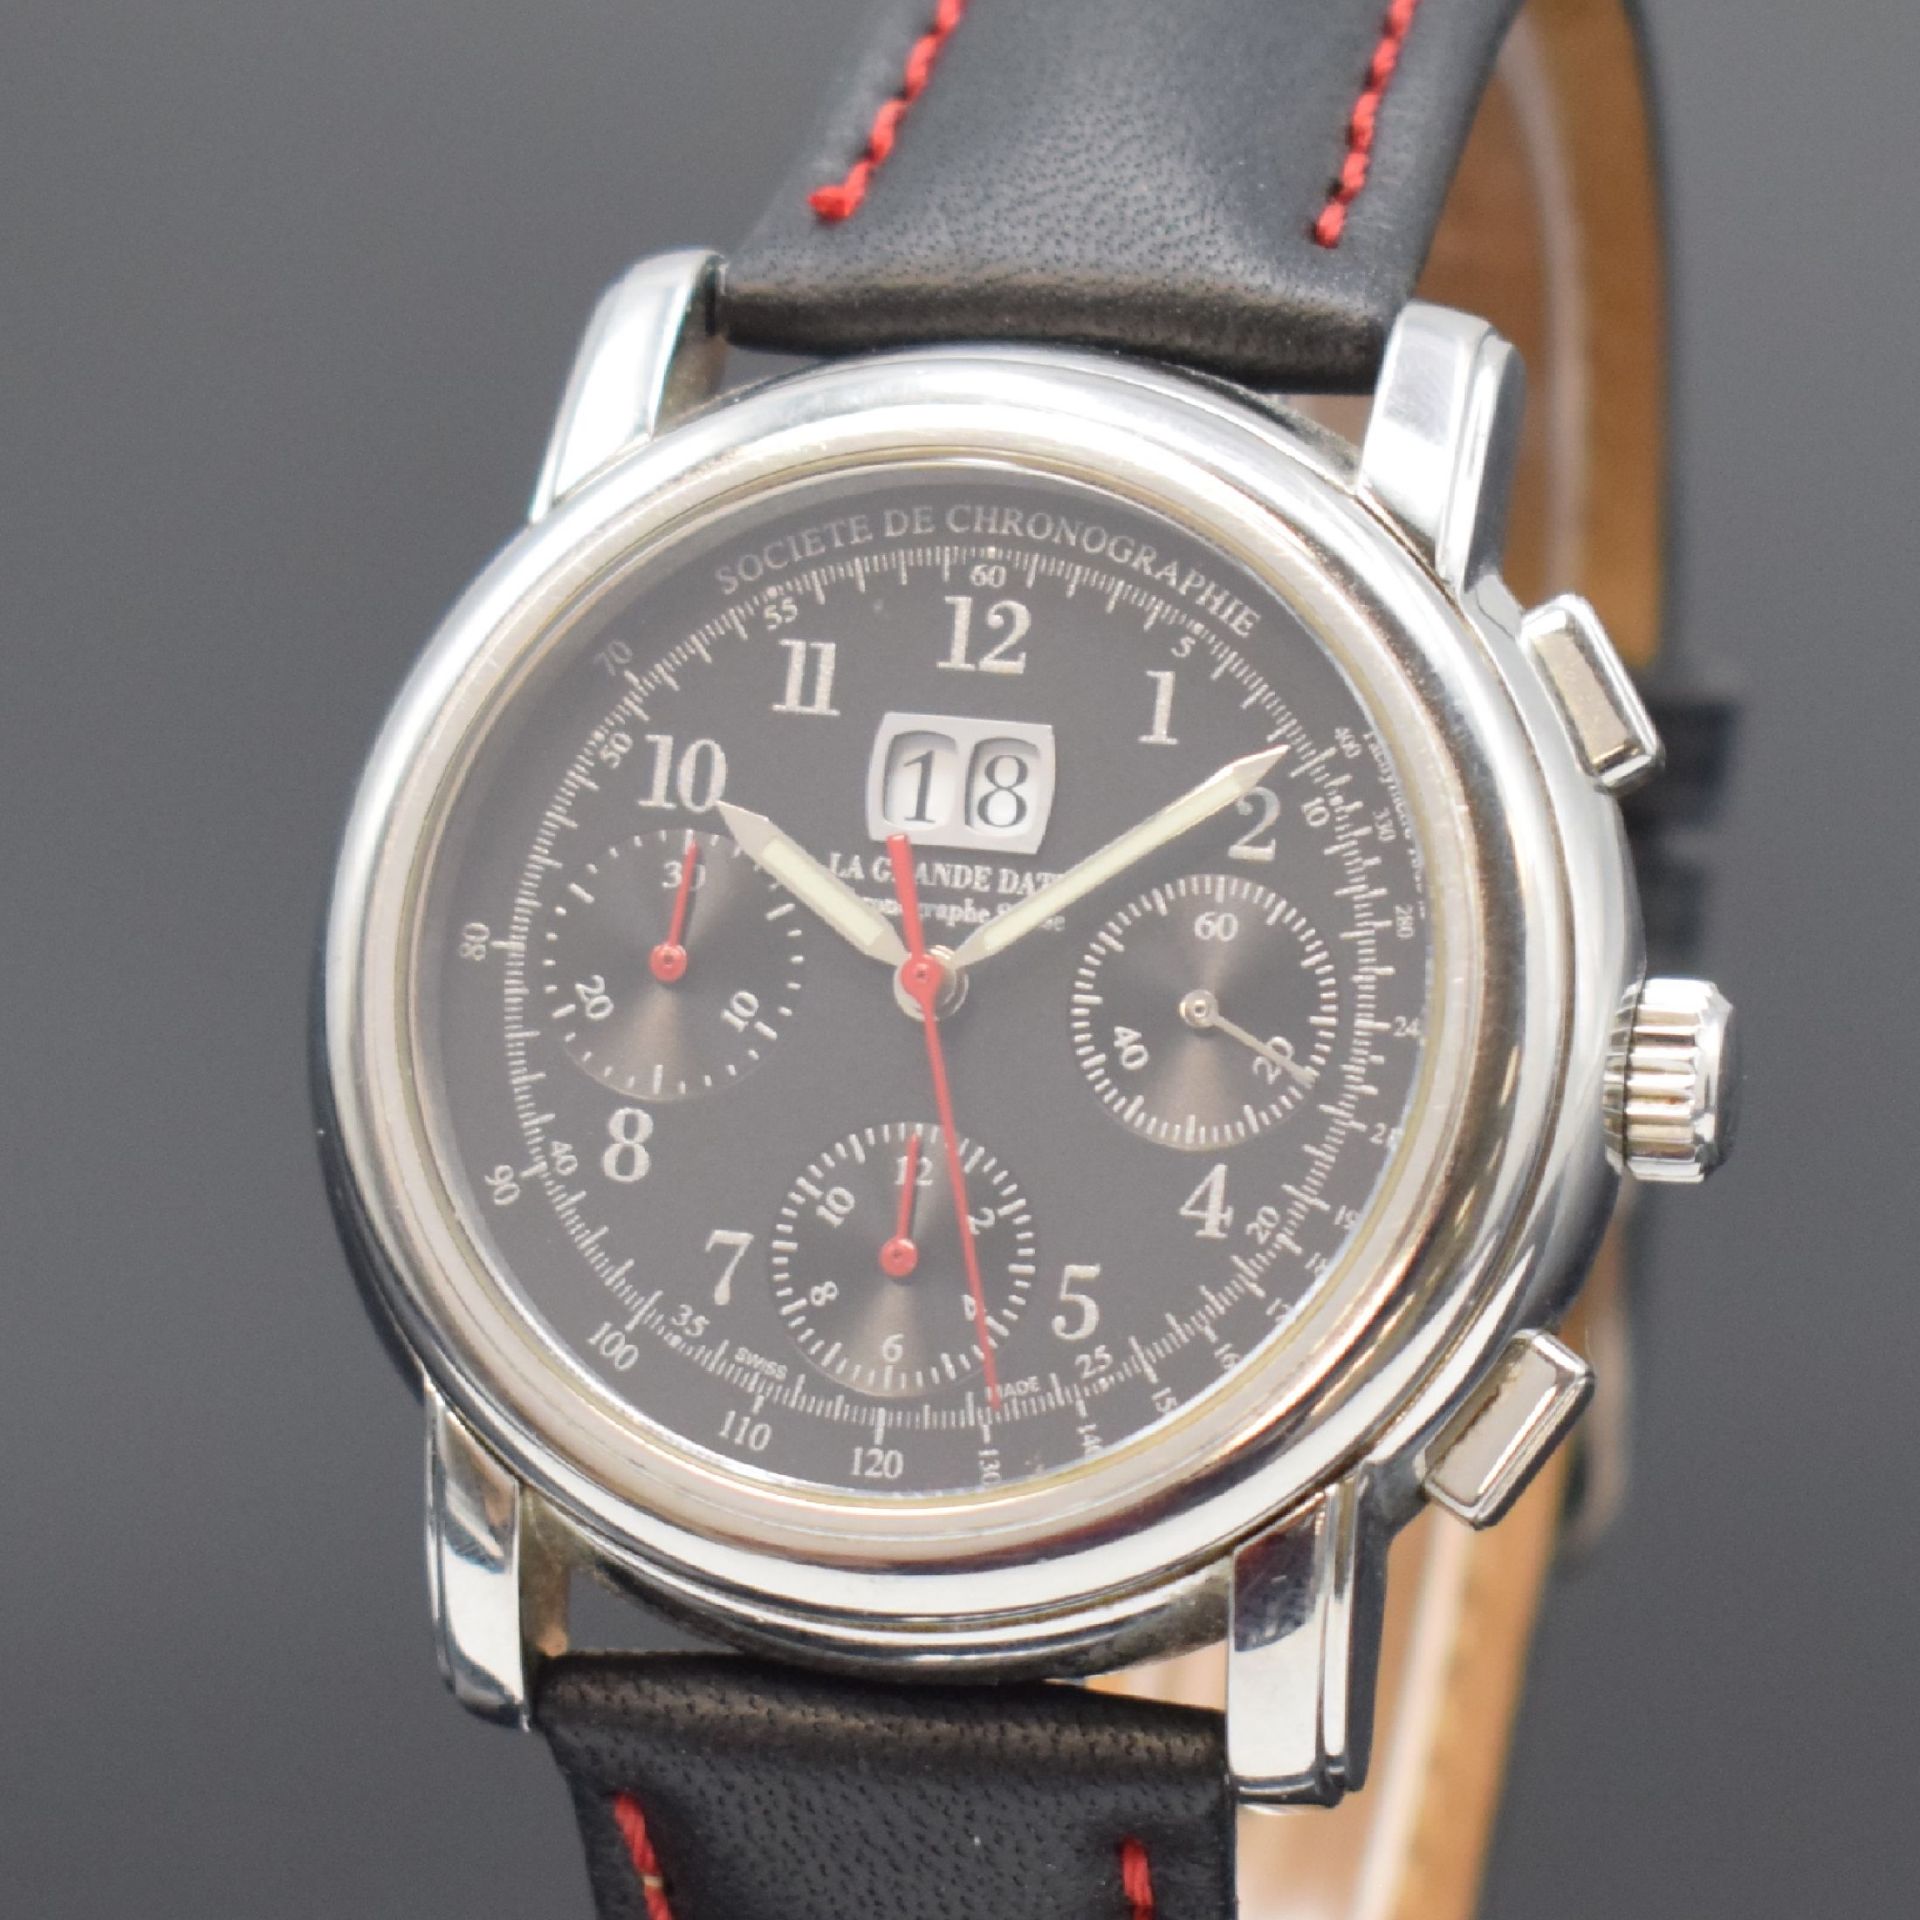 CHRONOGRAPHE SUISSE Armbandchronograph Modell Grande Date, - Image 2 of 4